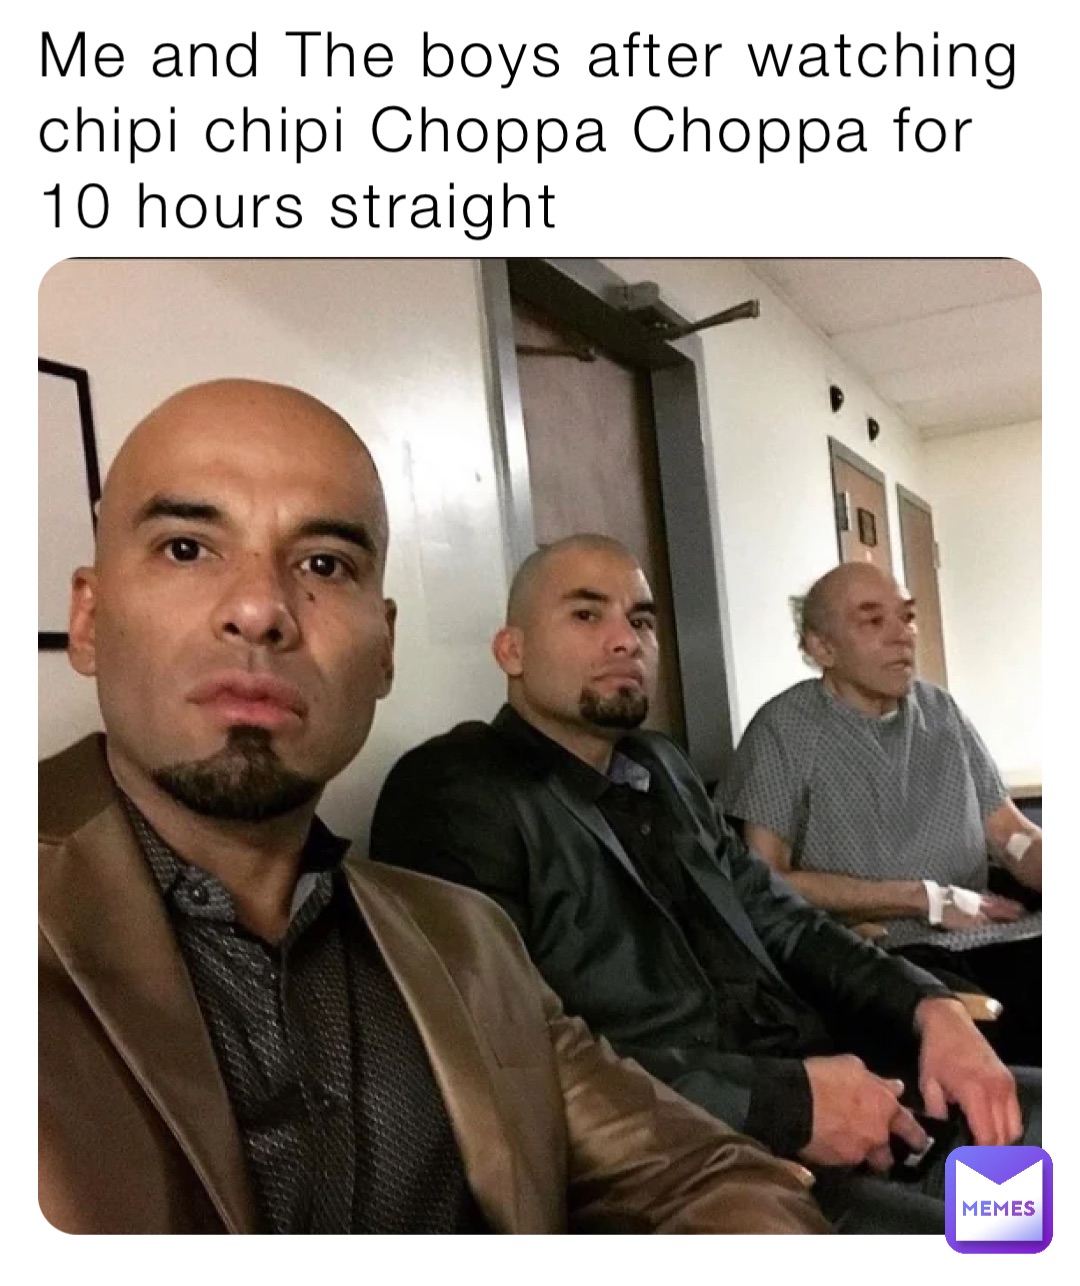 Me and The boys after watching chipi chipi Choppa Choppa for 10 hours straight